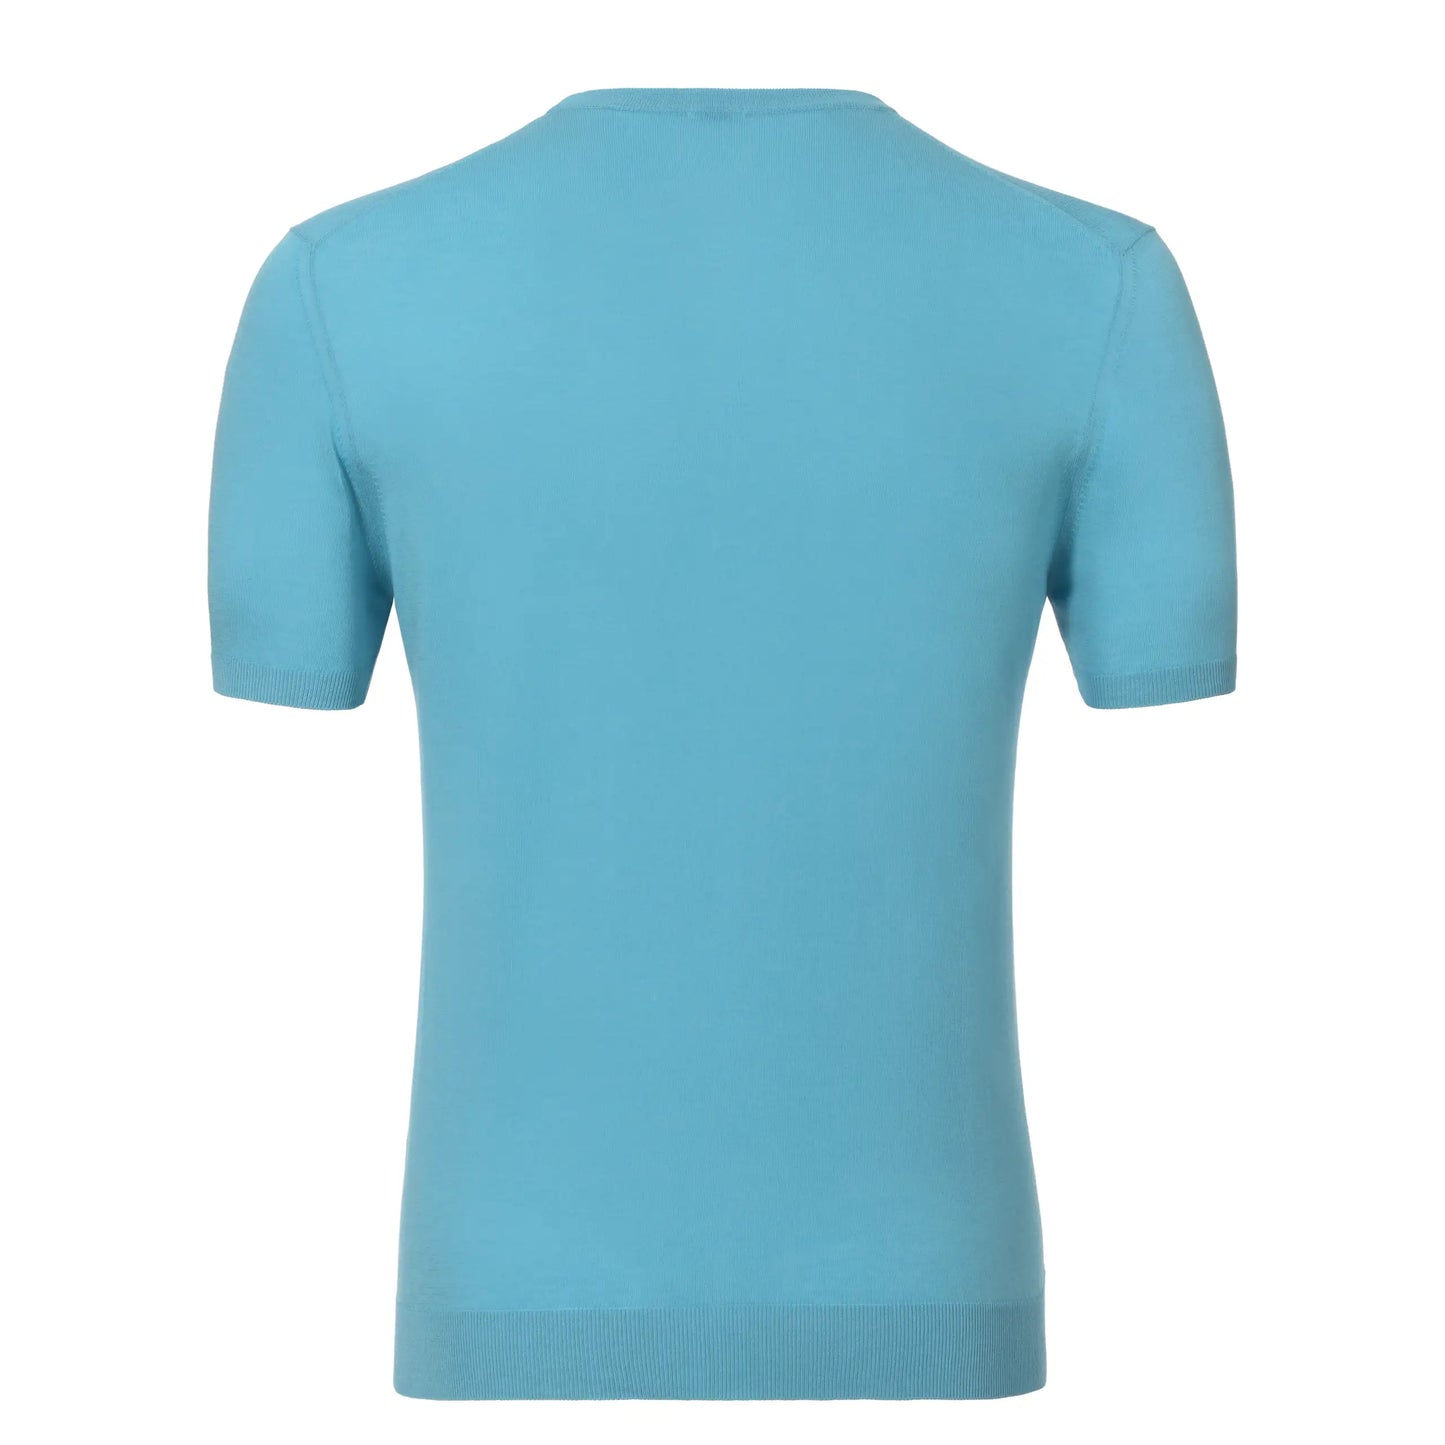 Cotton T-Shirt Sweater in Sky Blue